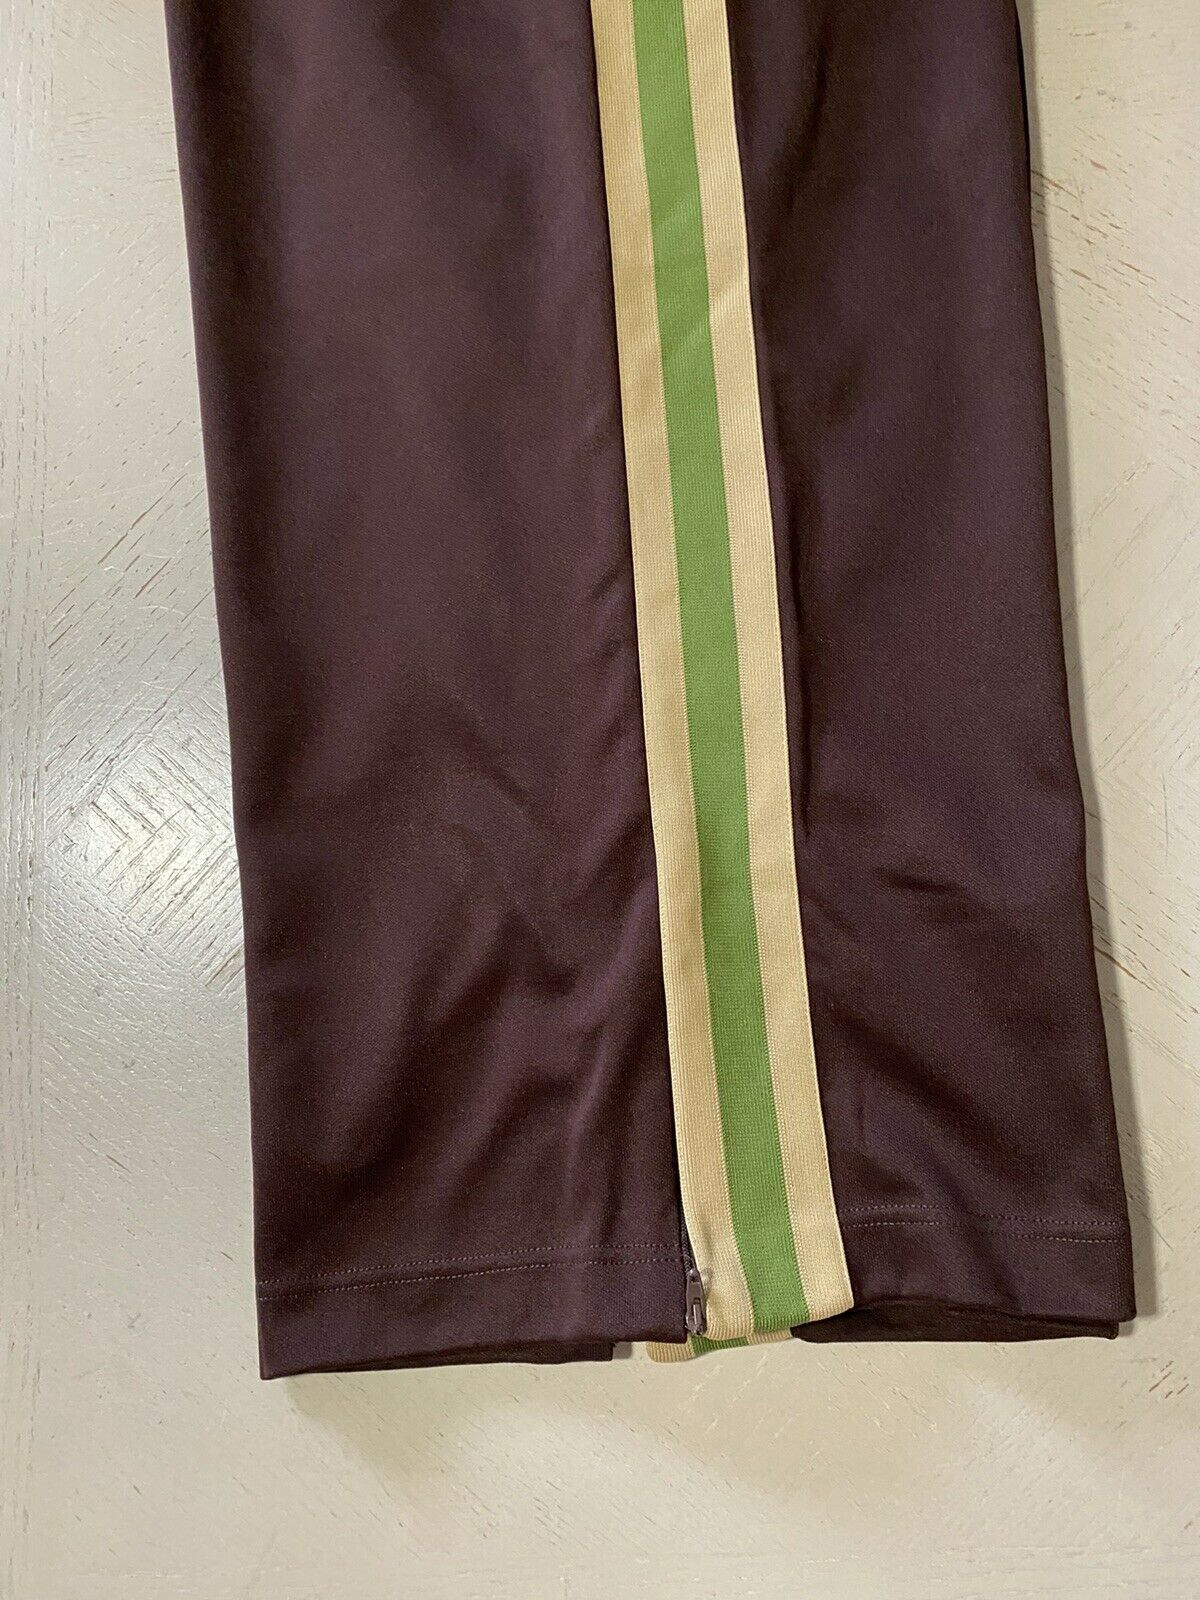 New $1100 Gucci Men Long Short Track Pants Brown Size L Made in Italy